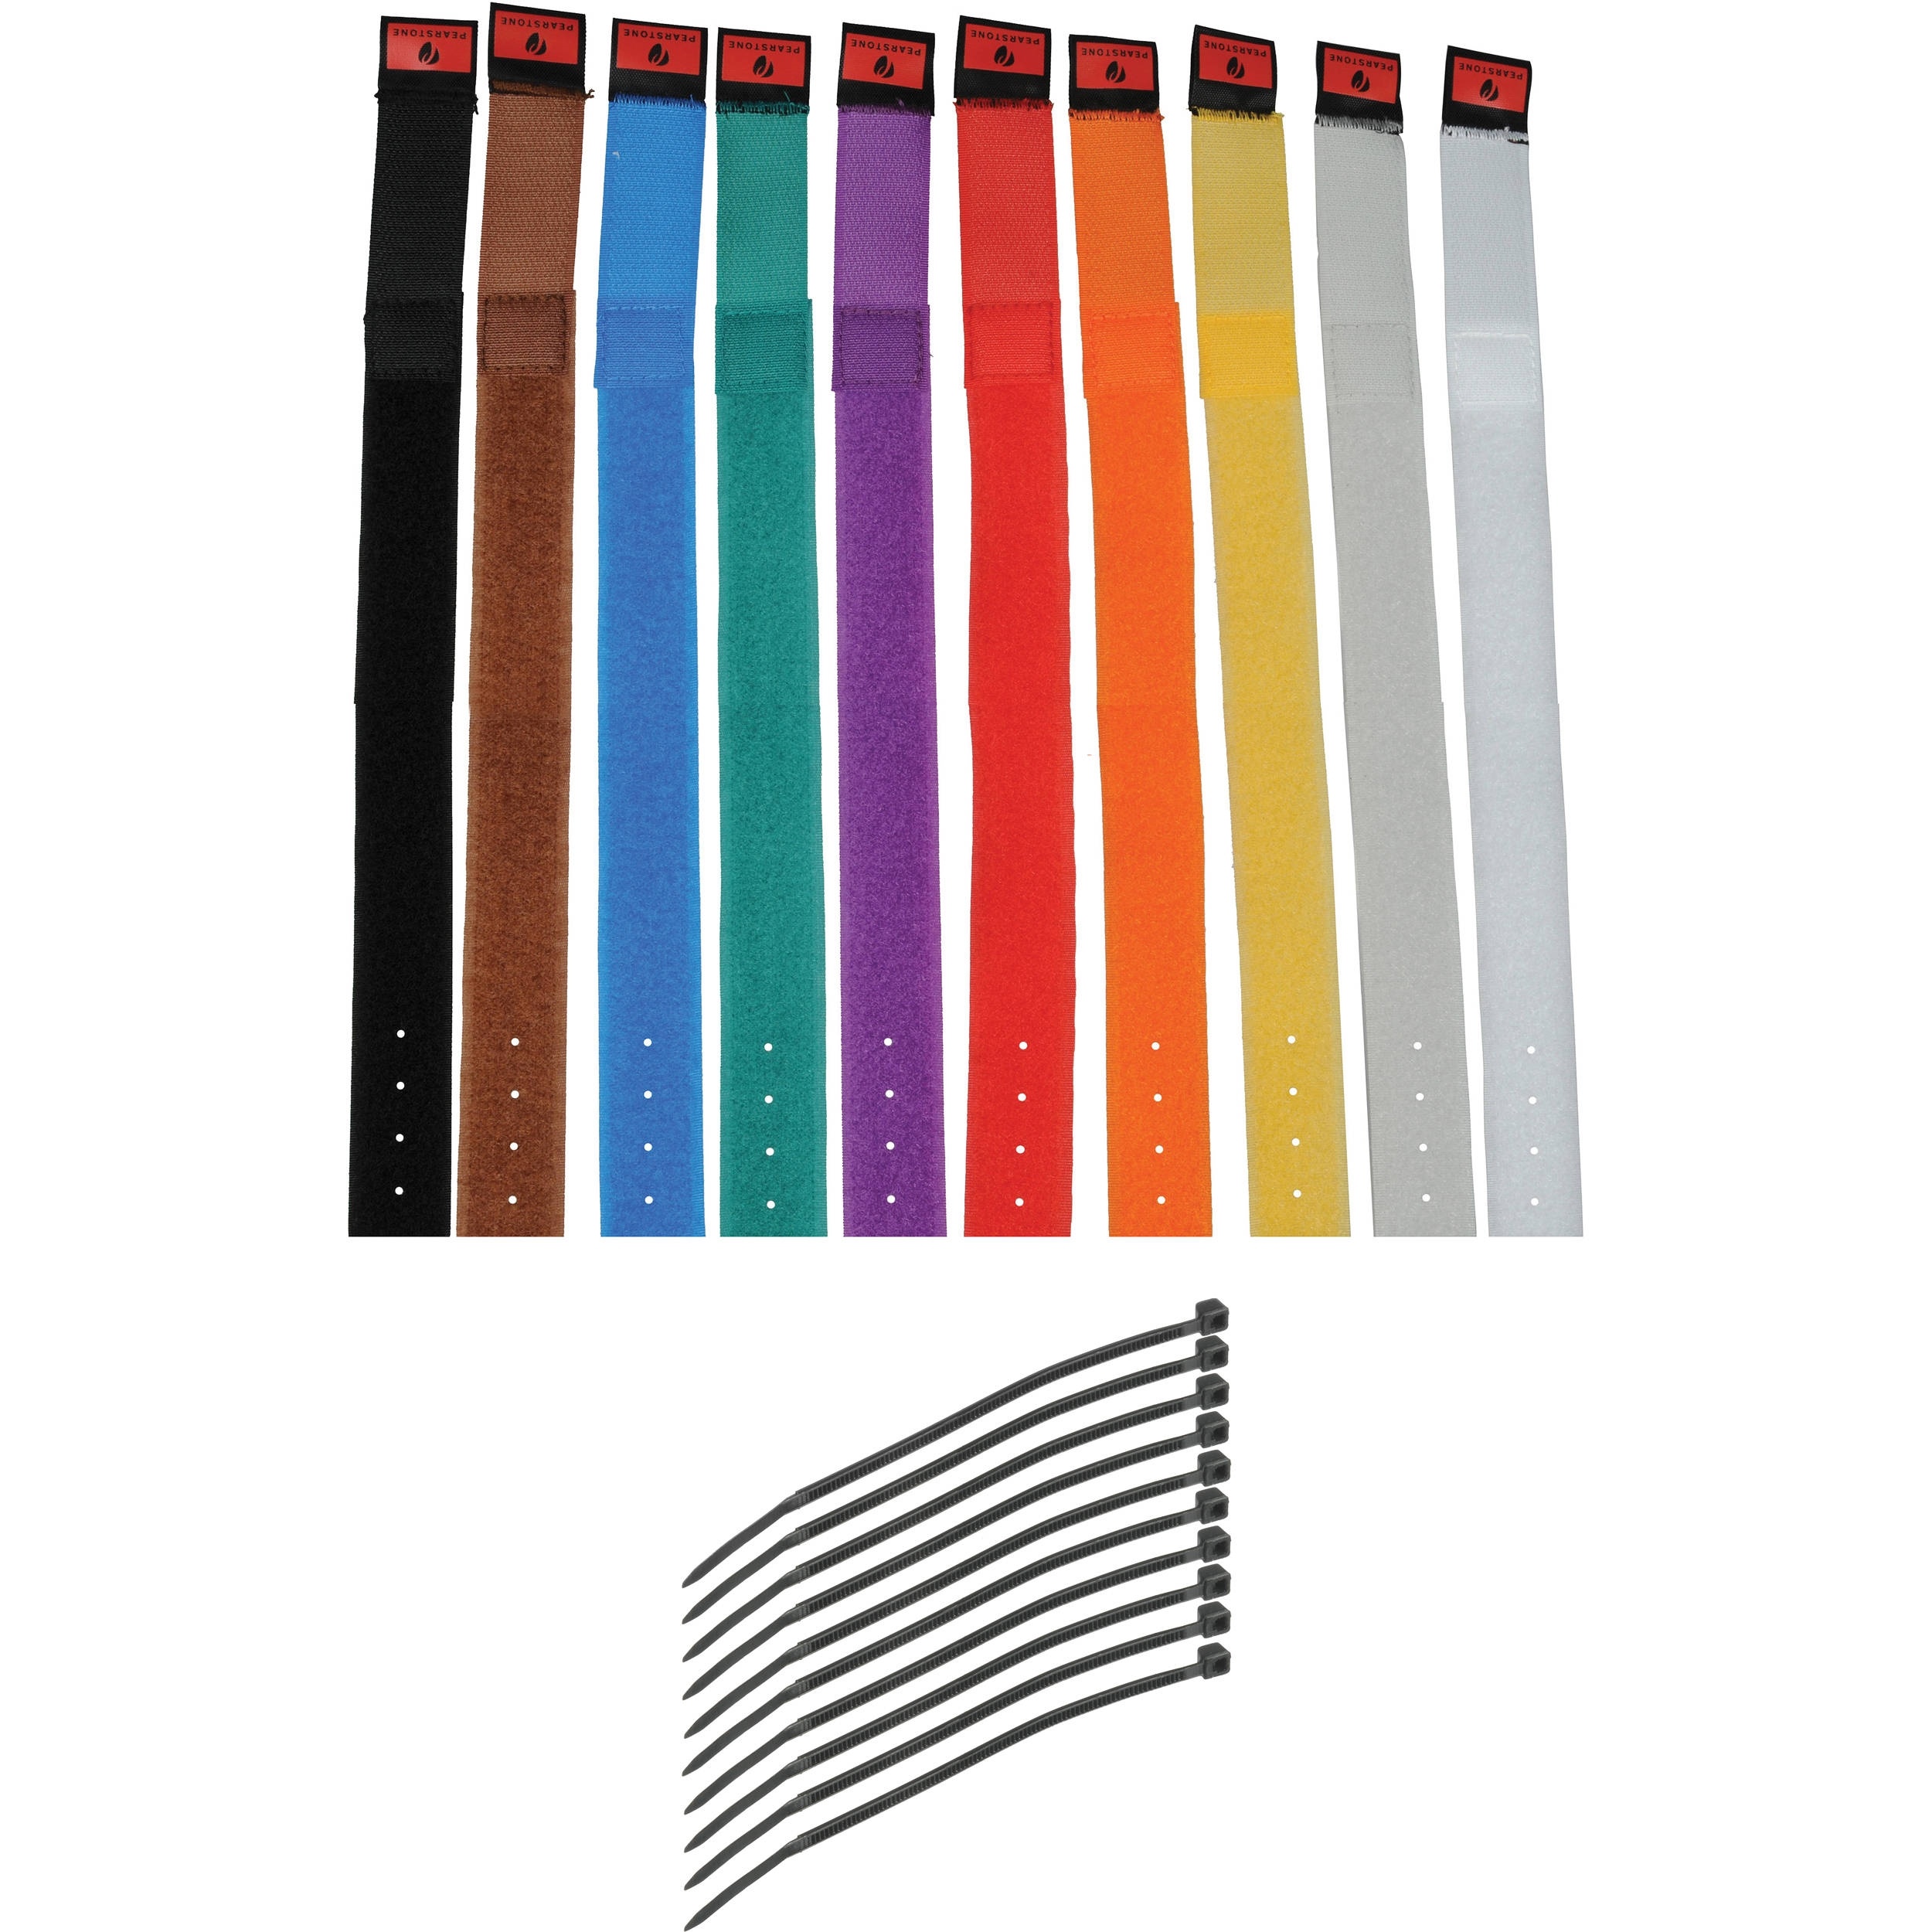 Pearstone 1 x 14" Touch Fastener Cable Straps (Multi-Colored, 10-Pack)